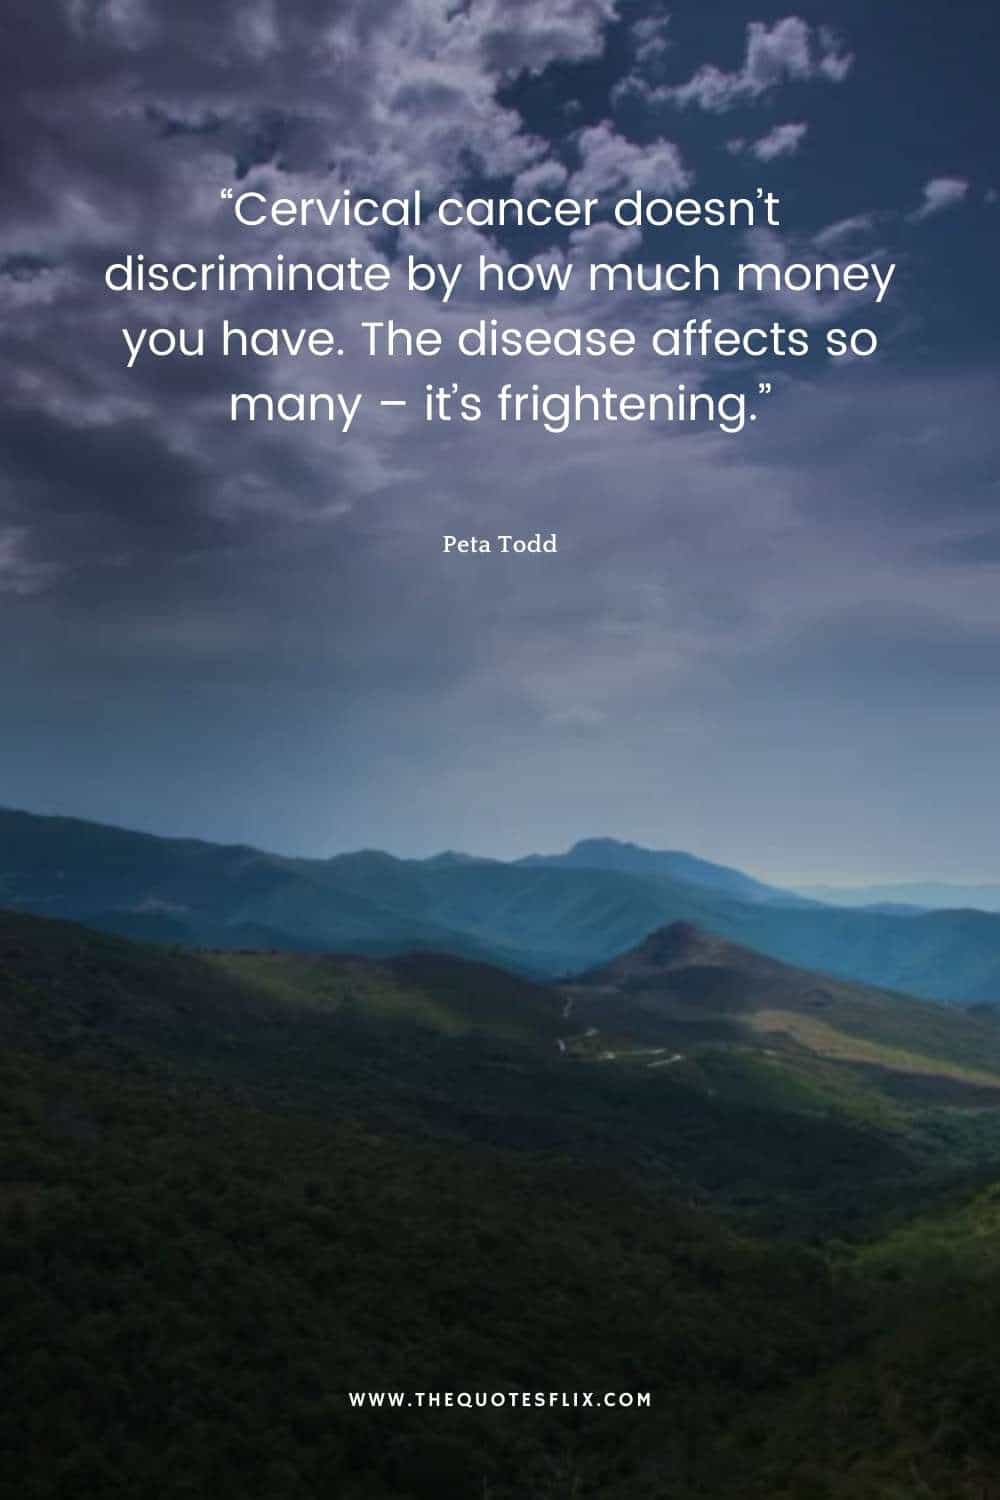 inspiratioinal cancer quotes - cervical cancer doesnt discriminate by money you have